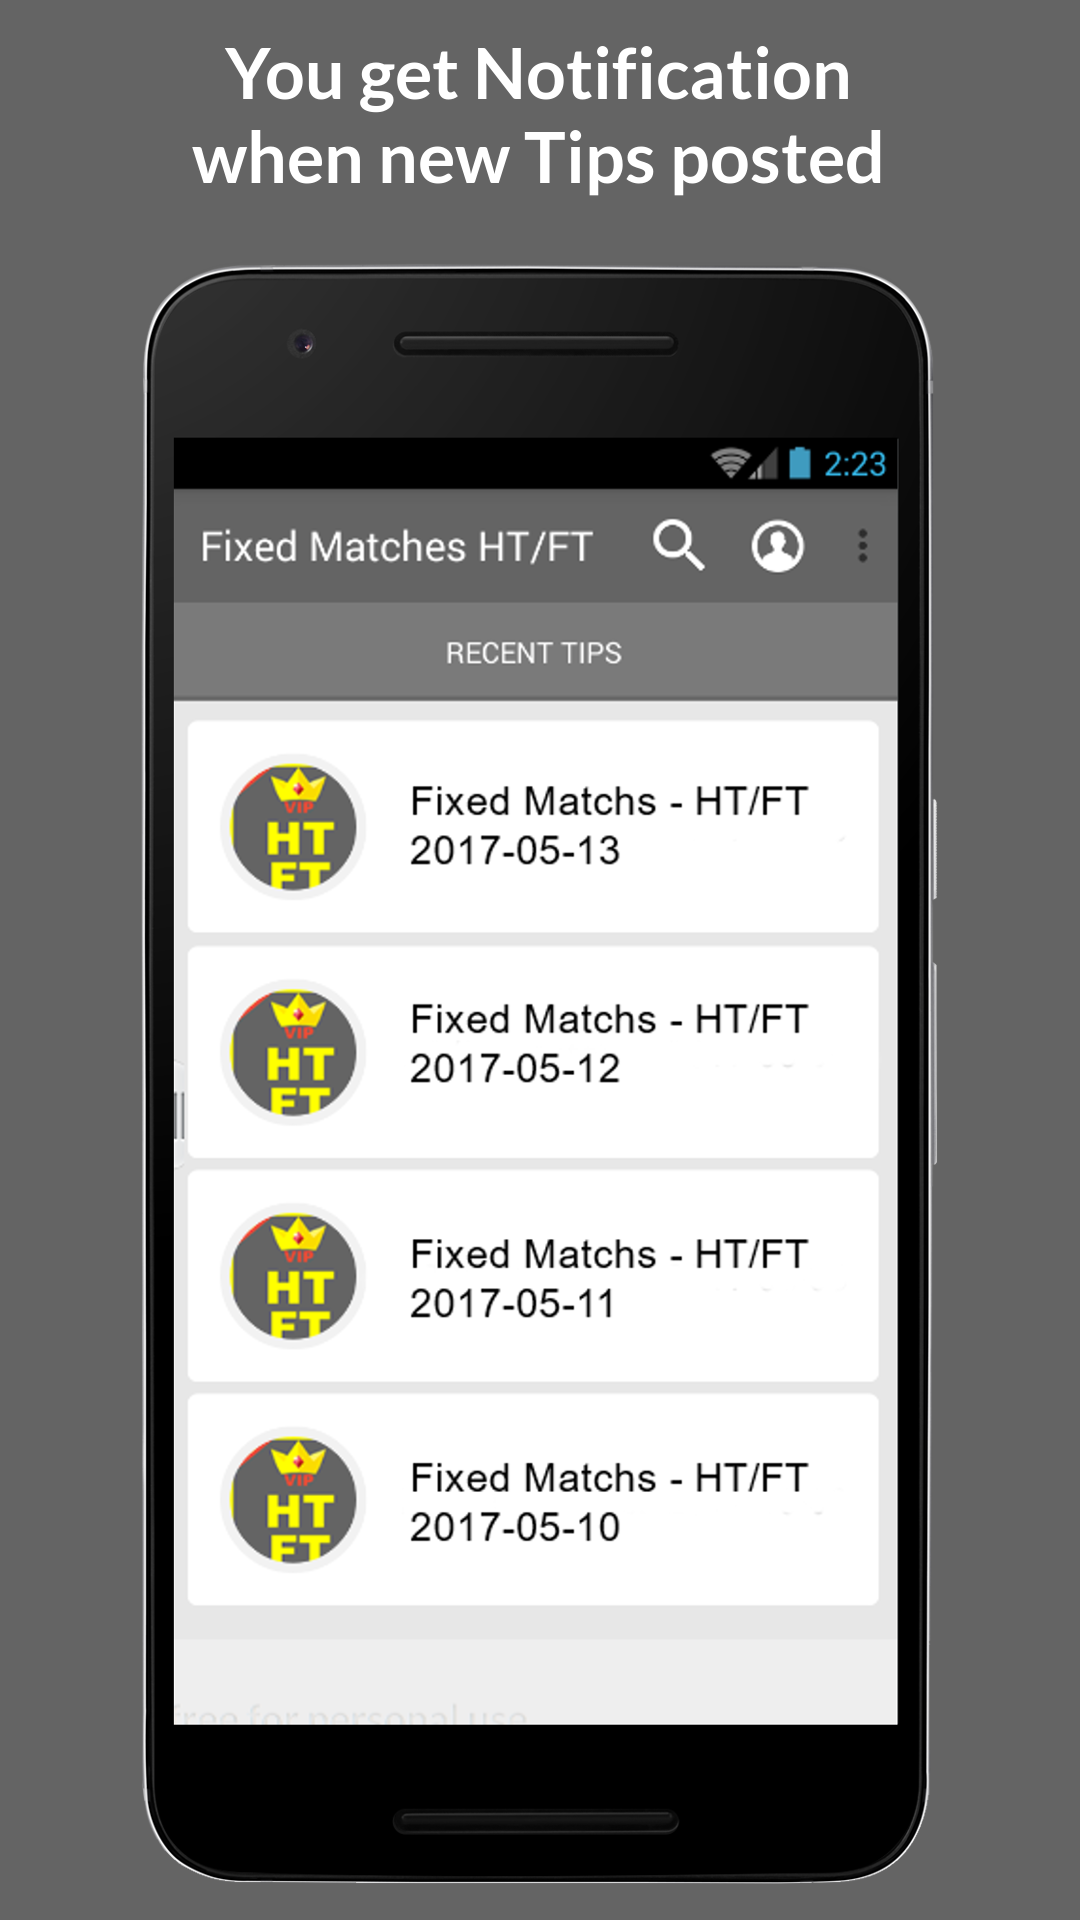 Fixed Matches HT FT Tips APK 1.1 for Android – Download Fixed Matches HT FT  Tips APK Latest Version from APKFab.com